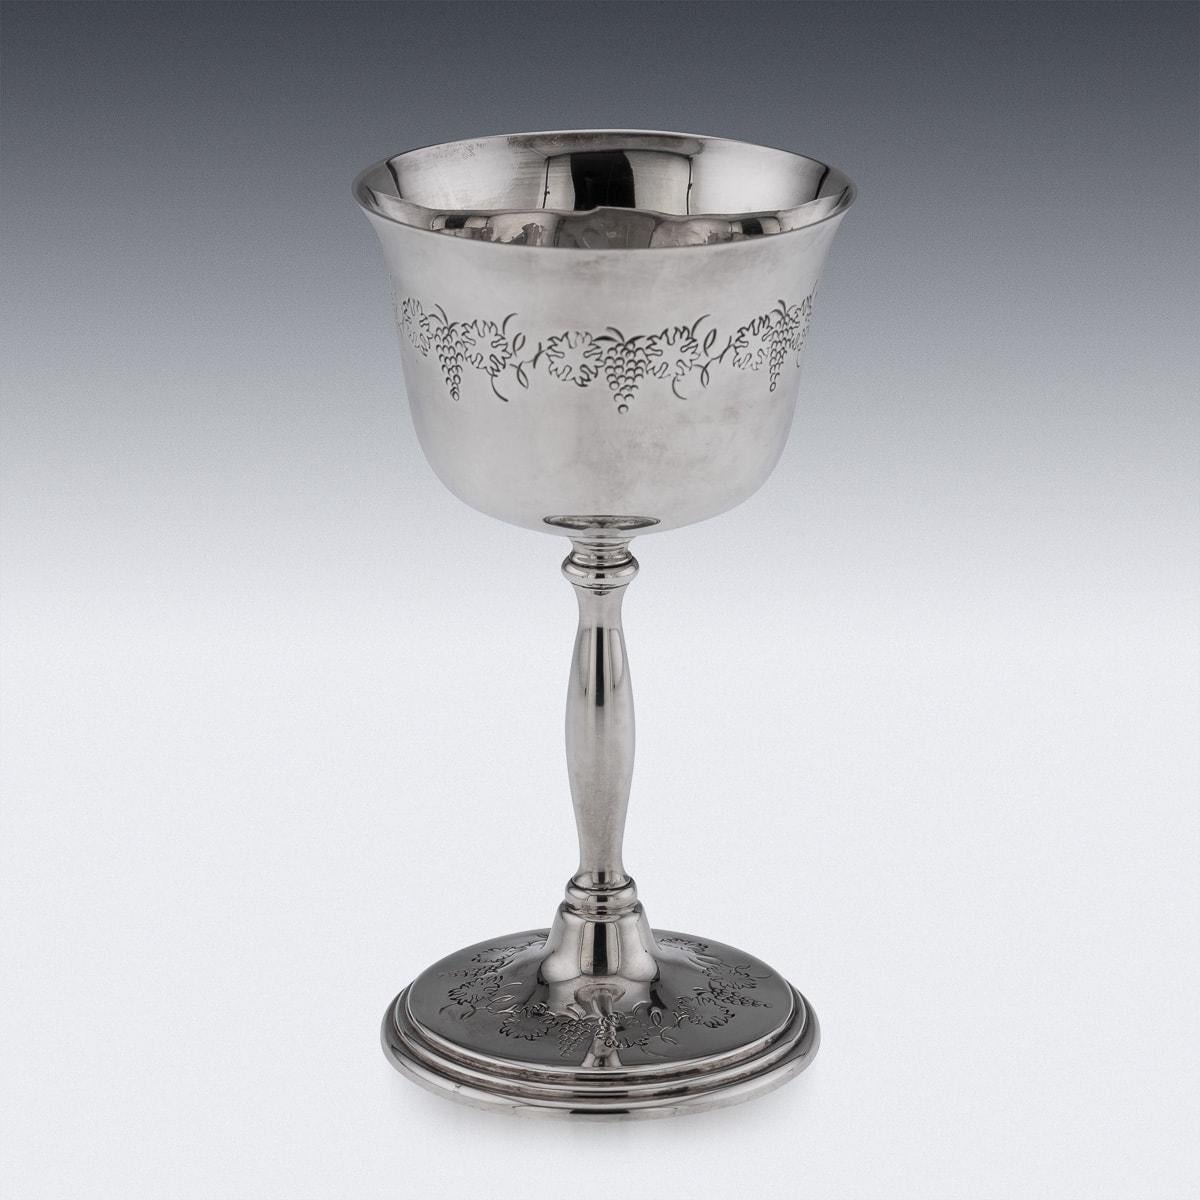 British 20th Century Set Of Six Solid Silver Wine Goblets By Cavalier, England c.1970s